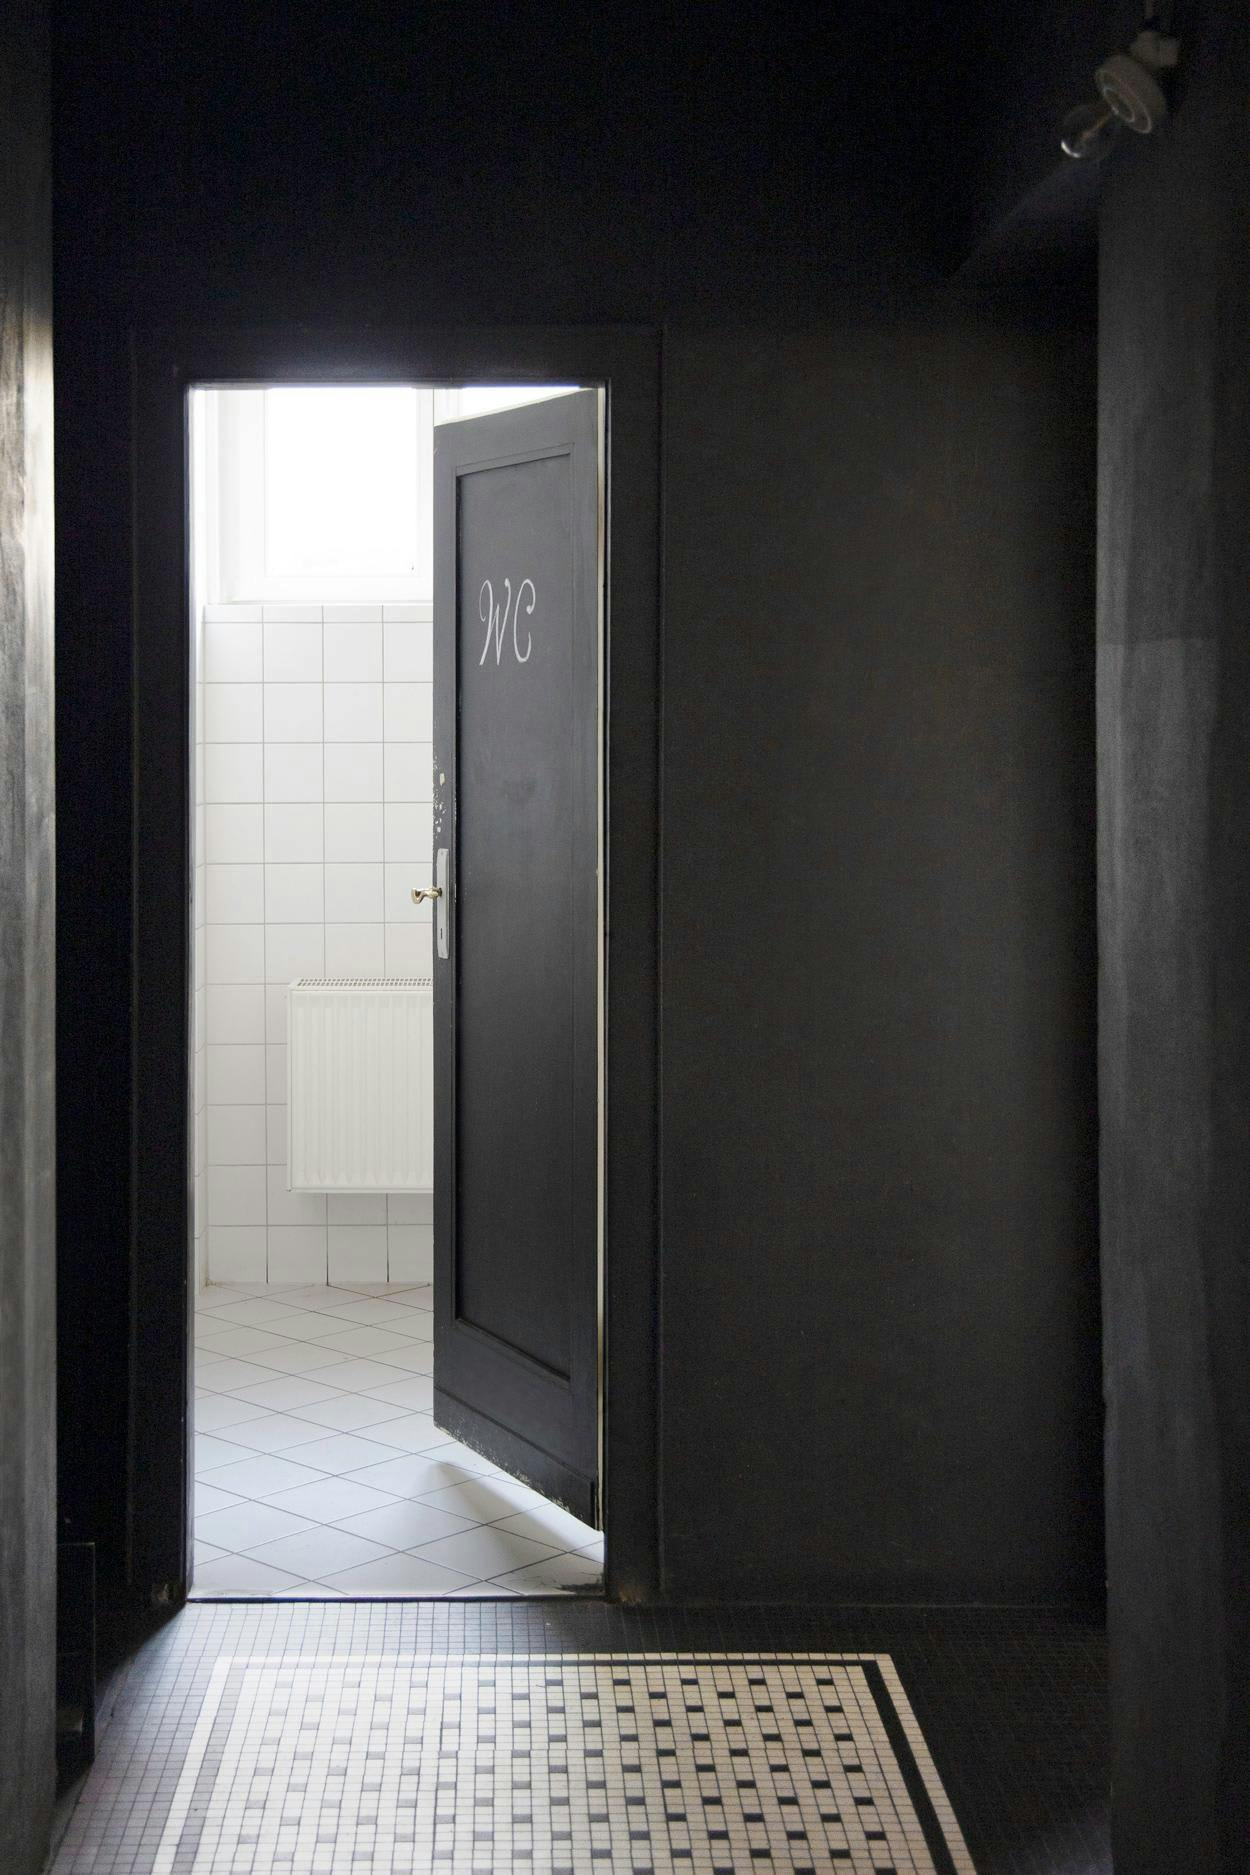 The image features a black doorway with a sign that reads "Bathroom."